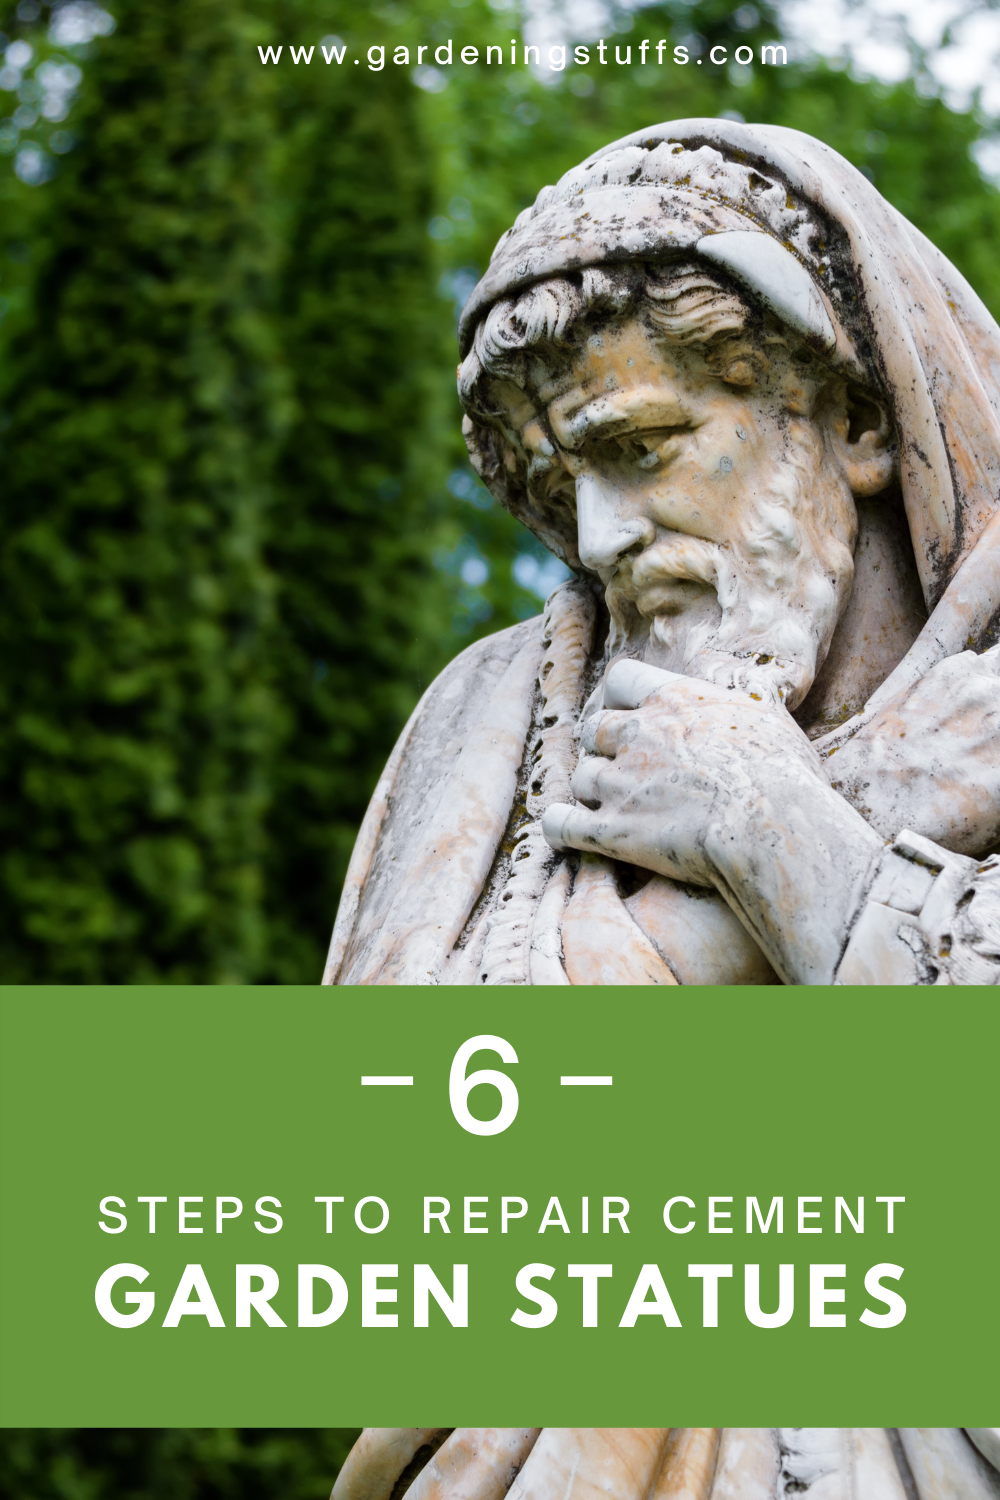 The cement statue is quite vulnerable to breakage and damage but you can easily repair your garden statues. Check out these 6 steps and easy to follow. This will save you from buying a new one!